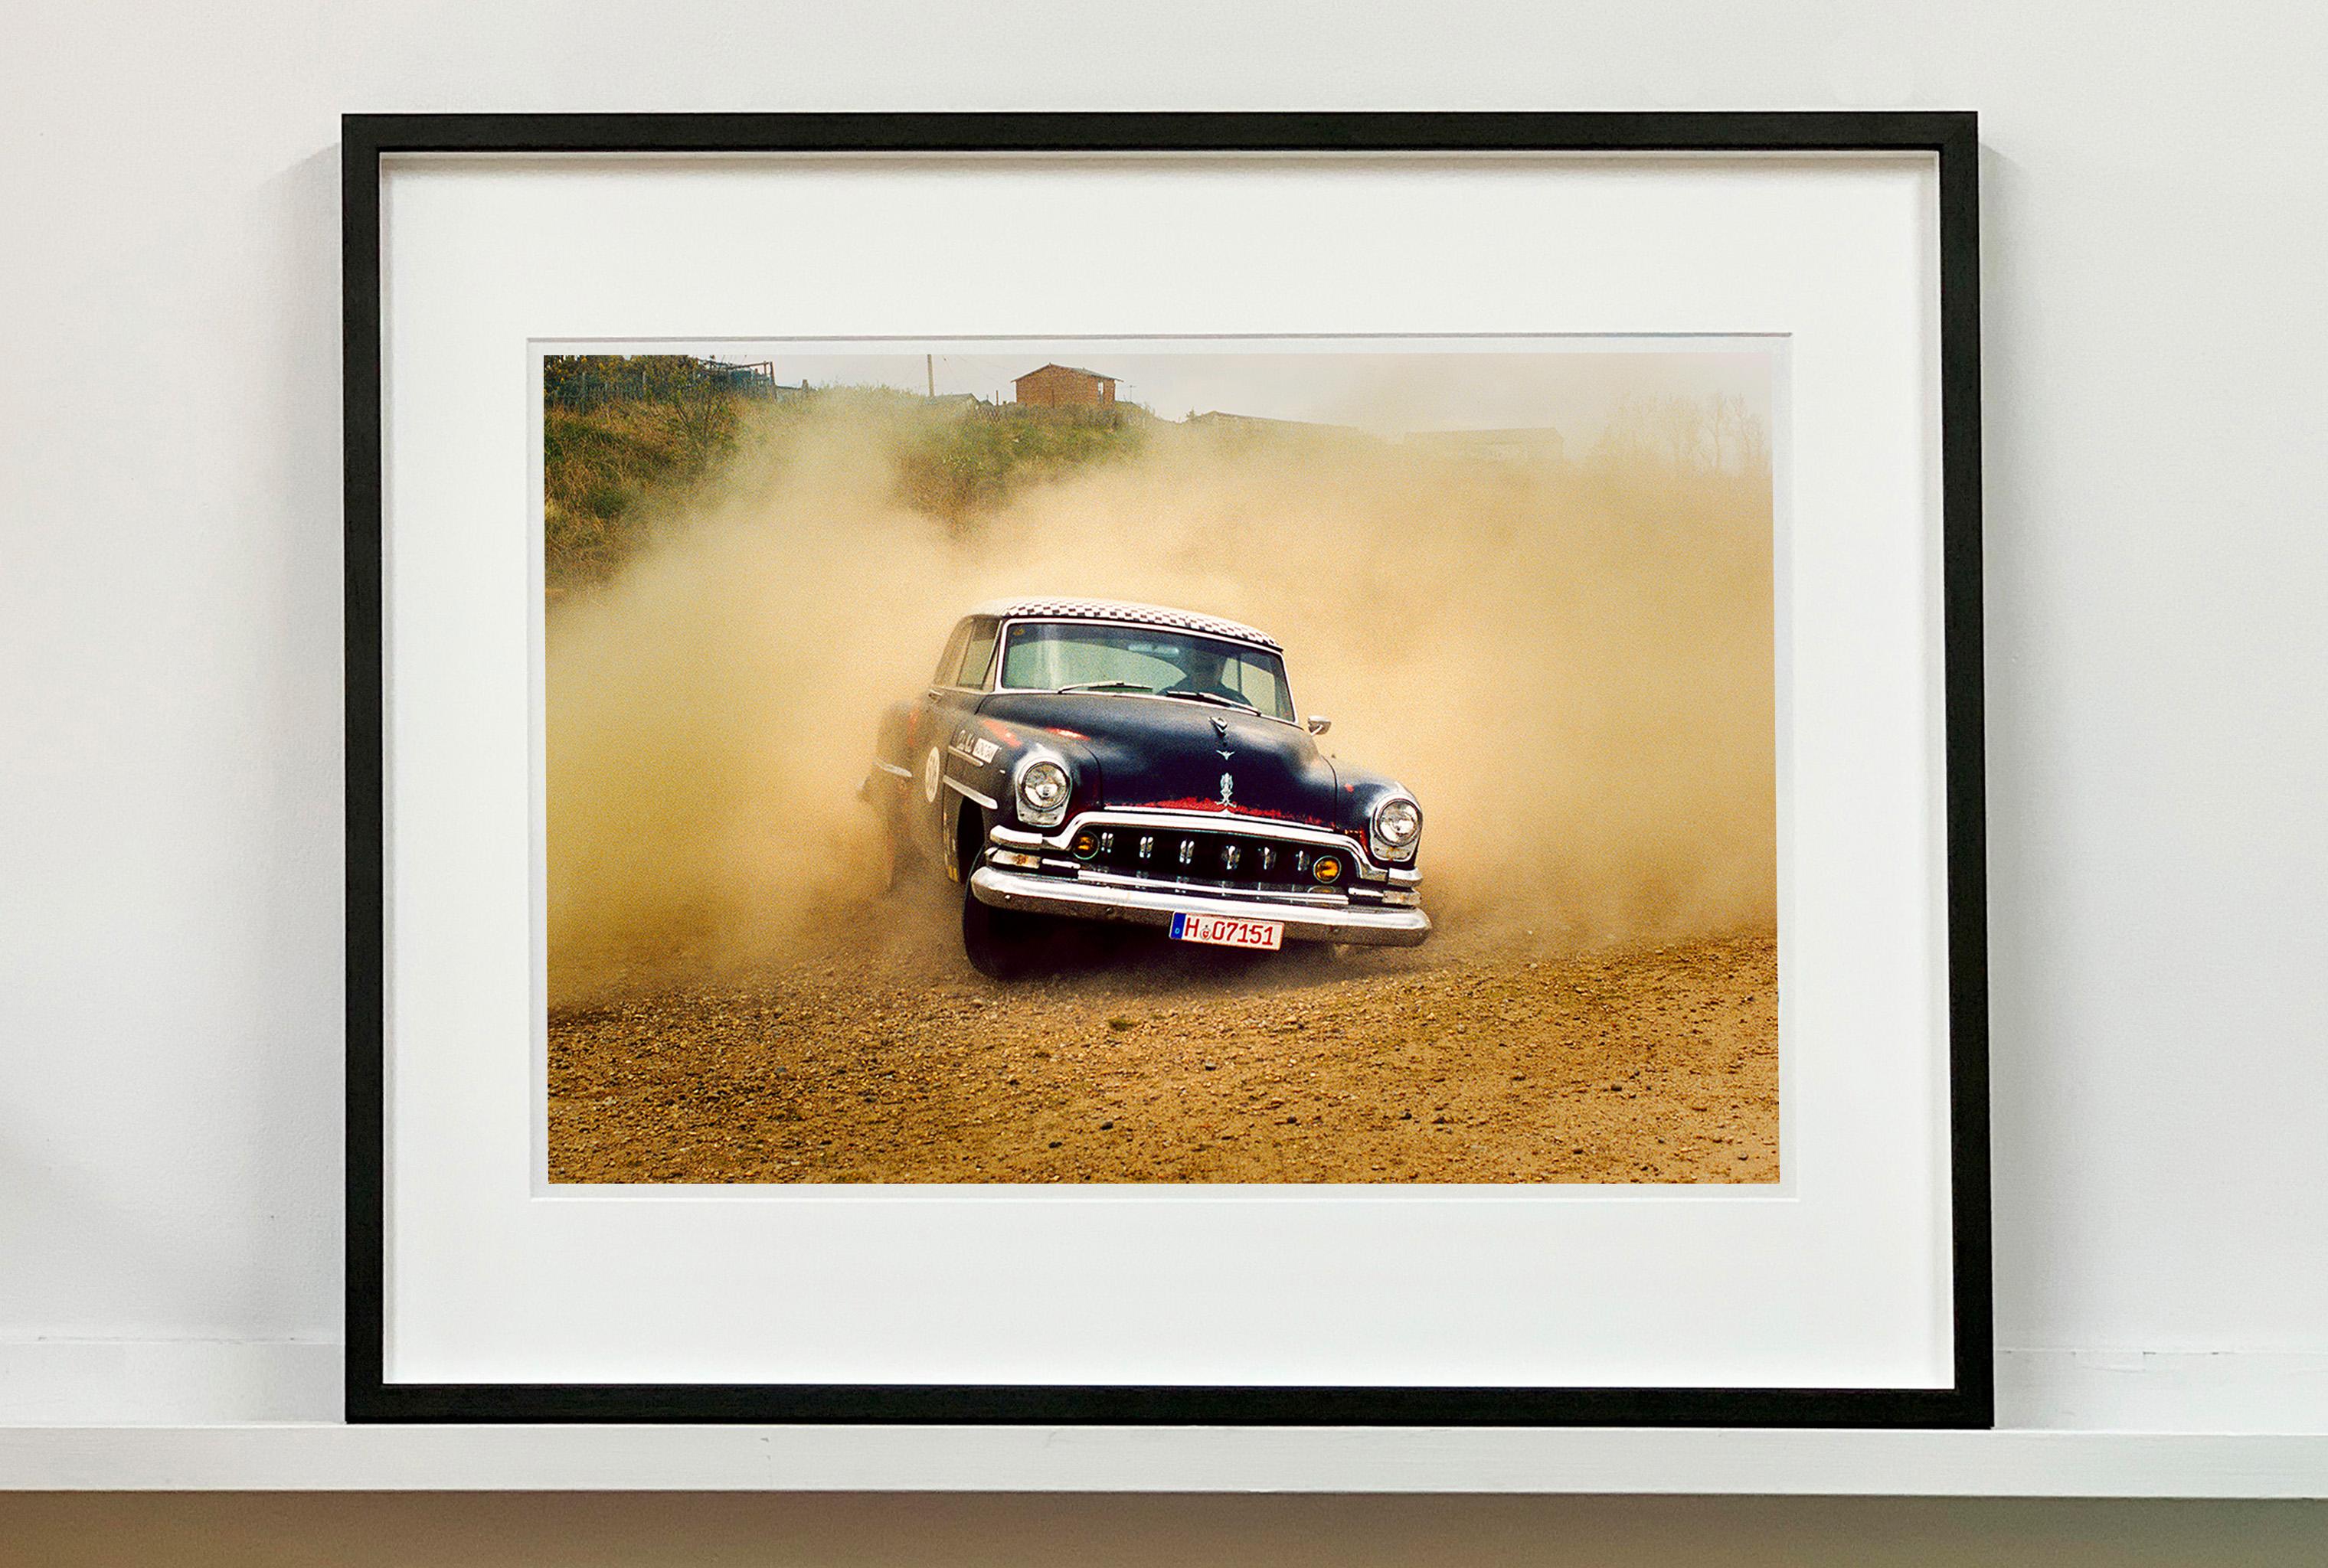 'Donutting' shows a classic American car donut driving on a Norfolk beach in the East of England. This photograph was captured at Hemsby Rock and Roll weekend, and is part of Richard Heeps' Man's Ruin' series.

This artwork is a limited edition